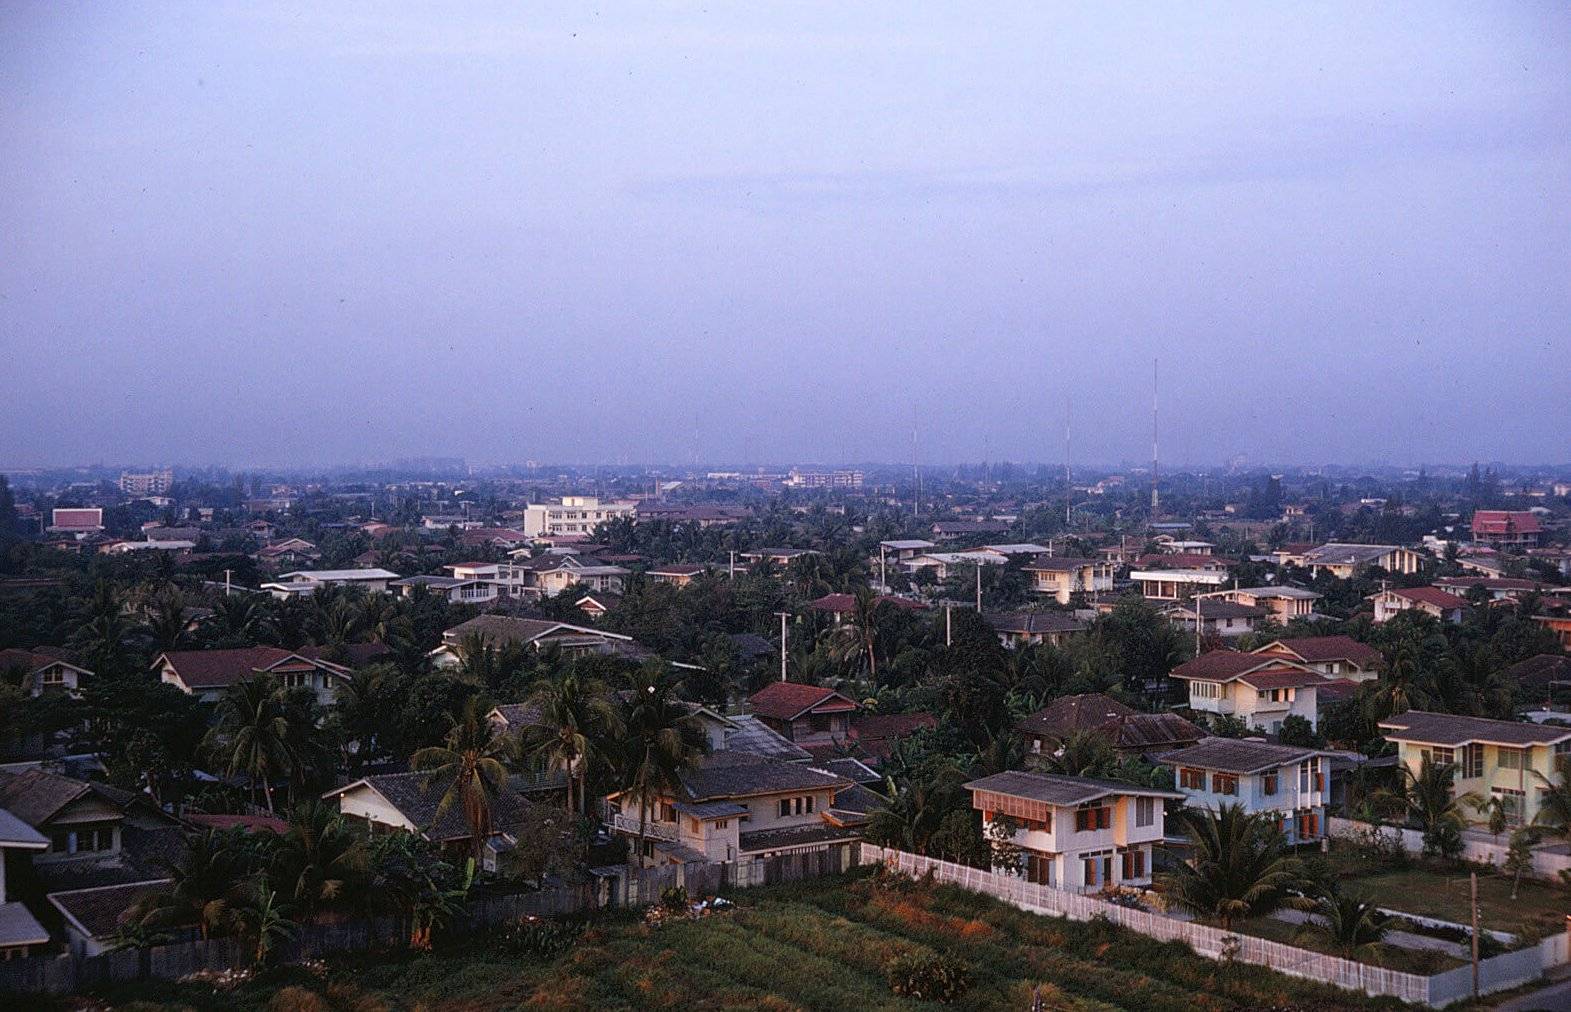 A landscape taken from up high of what looks to be suburbs of Thailand.